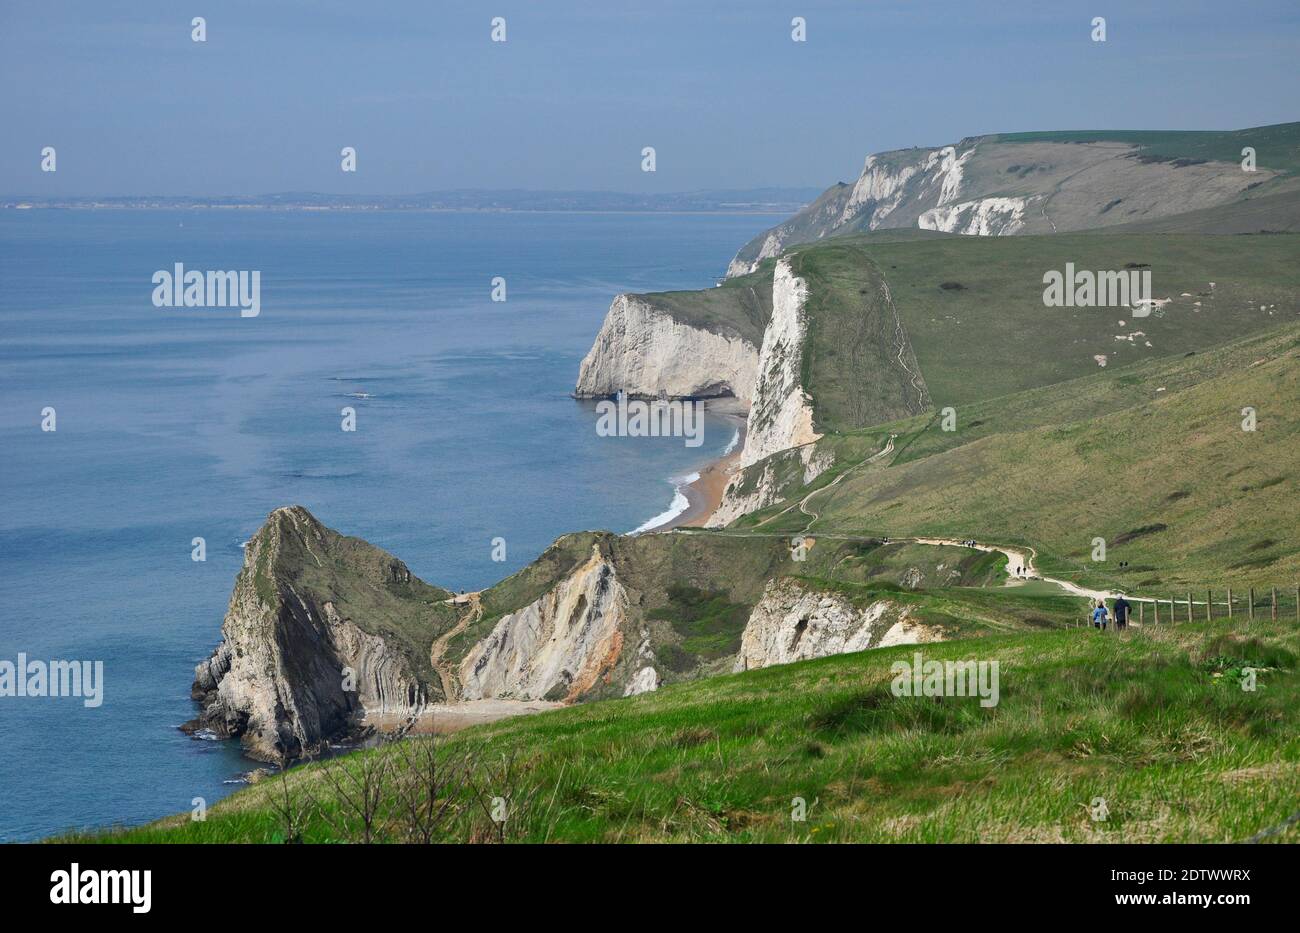 Looking west with  Durdle Door and on to chalk cliffs of Swyre Head and Bat's Head.Part of the Jurrasic coast of Dorset. UK Stock Photo